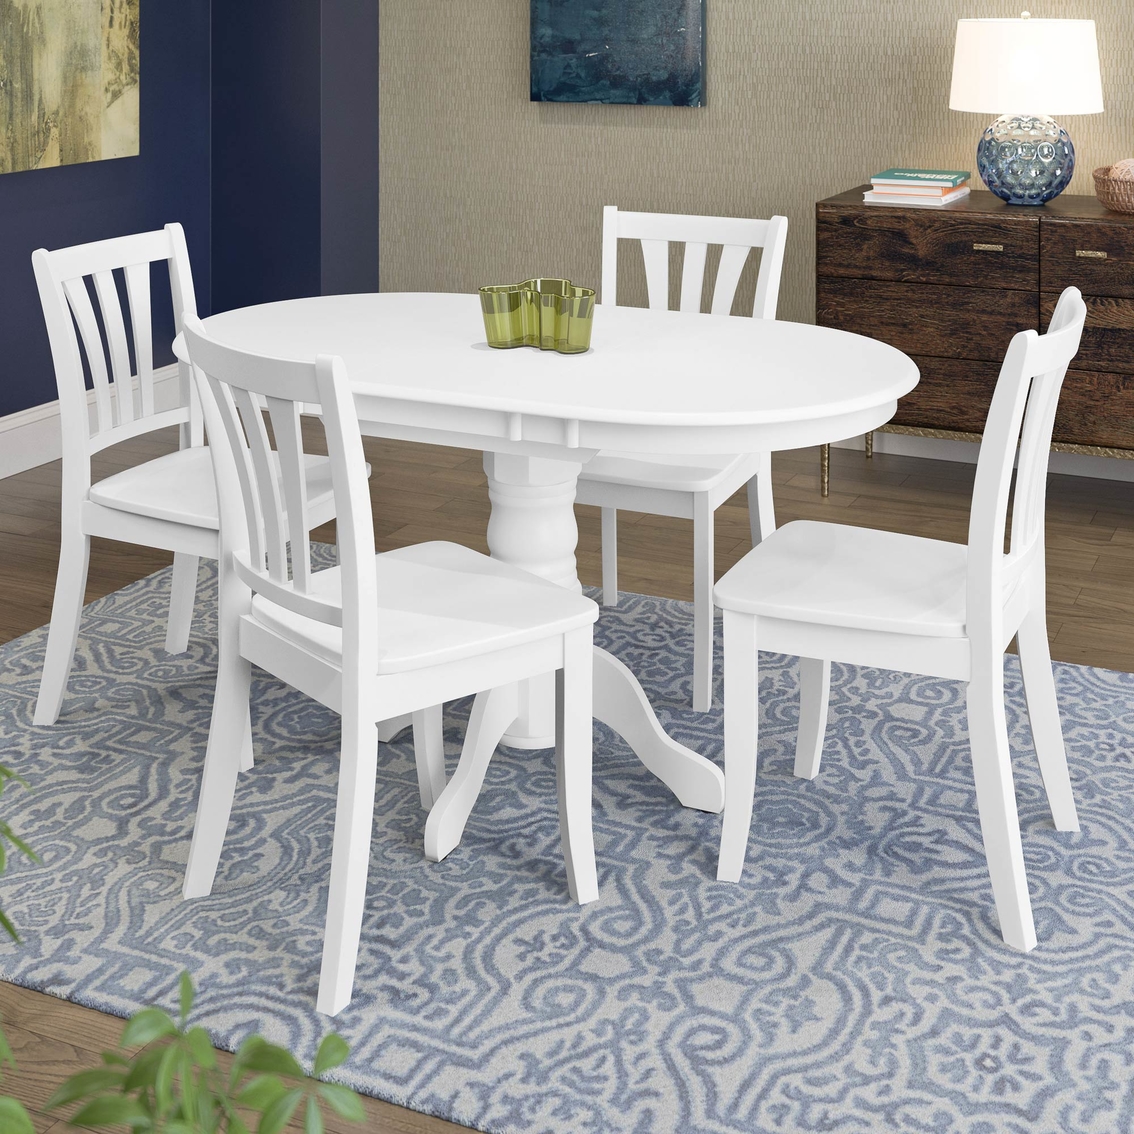 CorLiving Dillon 5 pc. Extendable Wooden Dining Set - Image 2 of 2